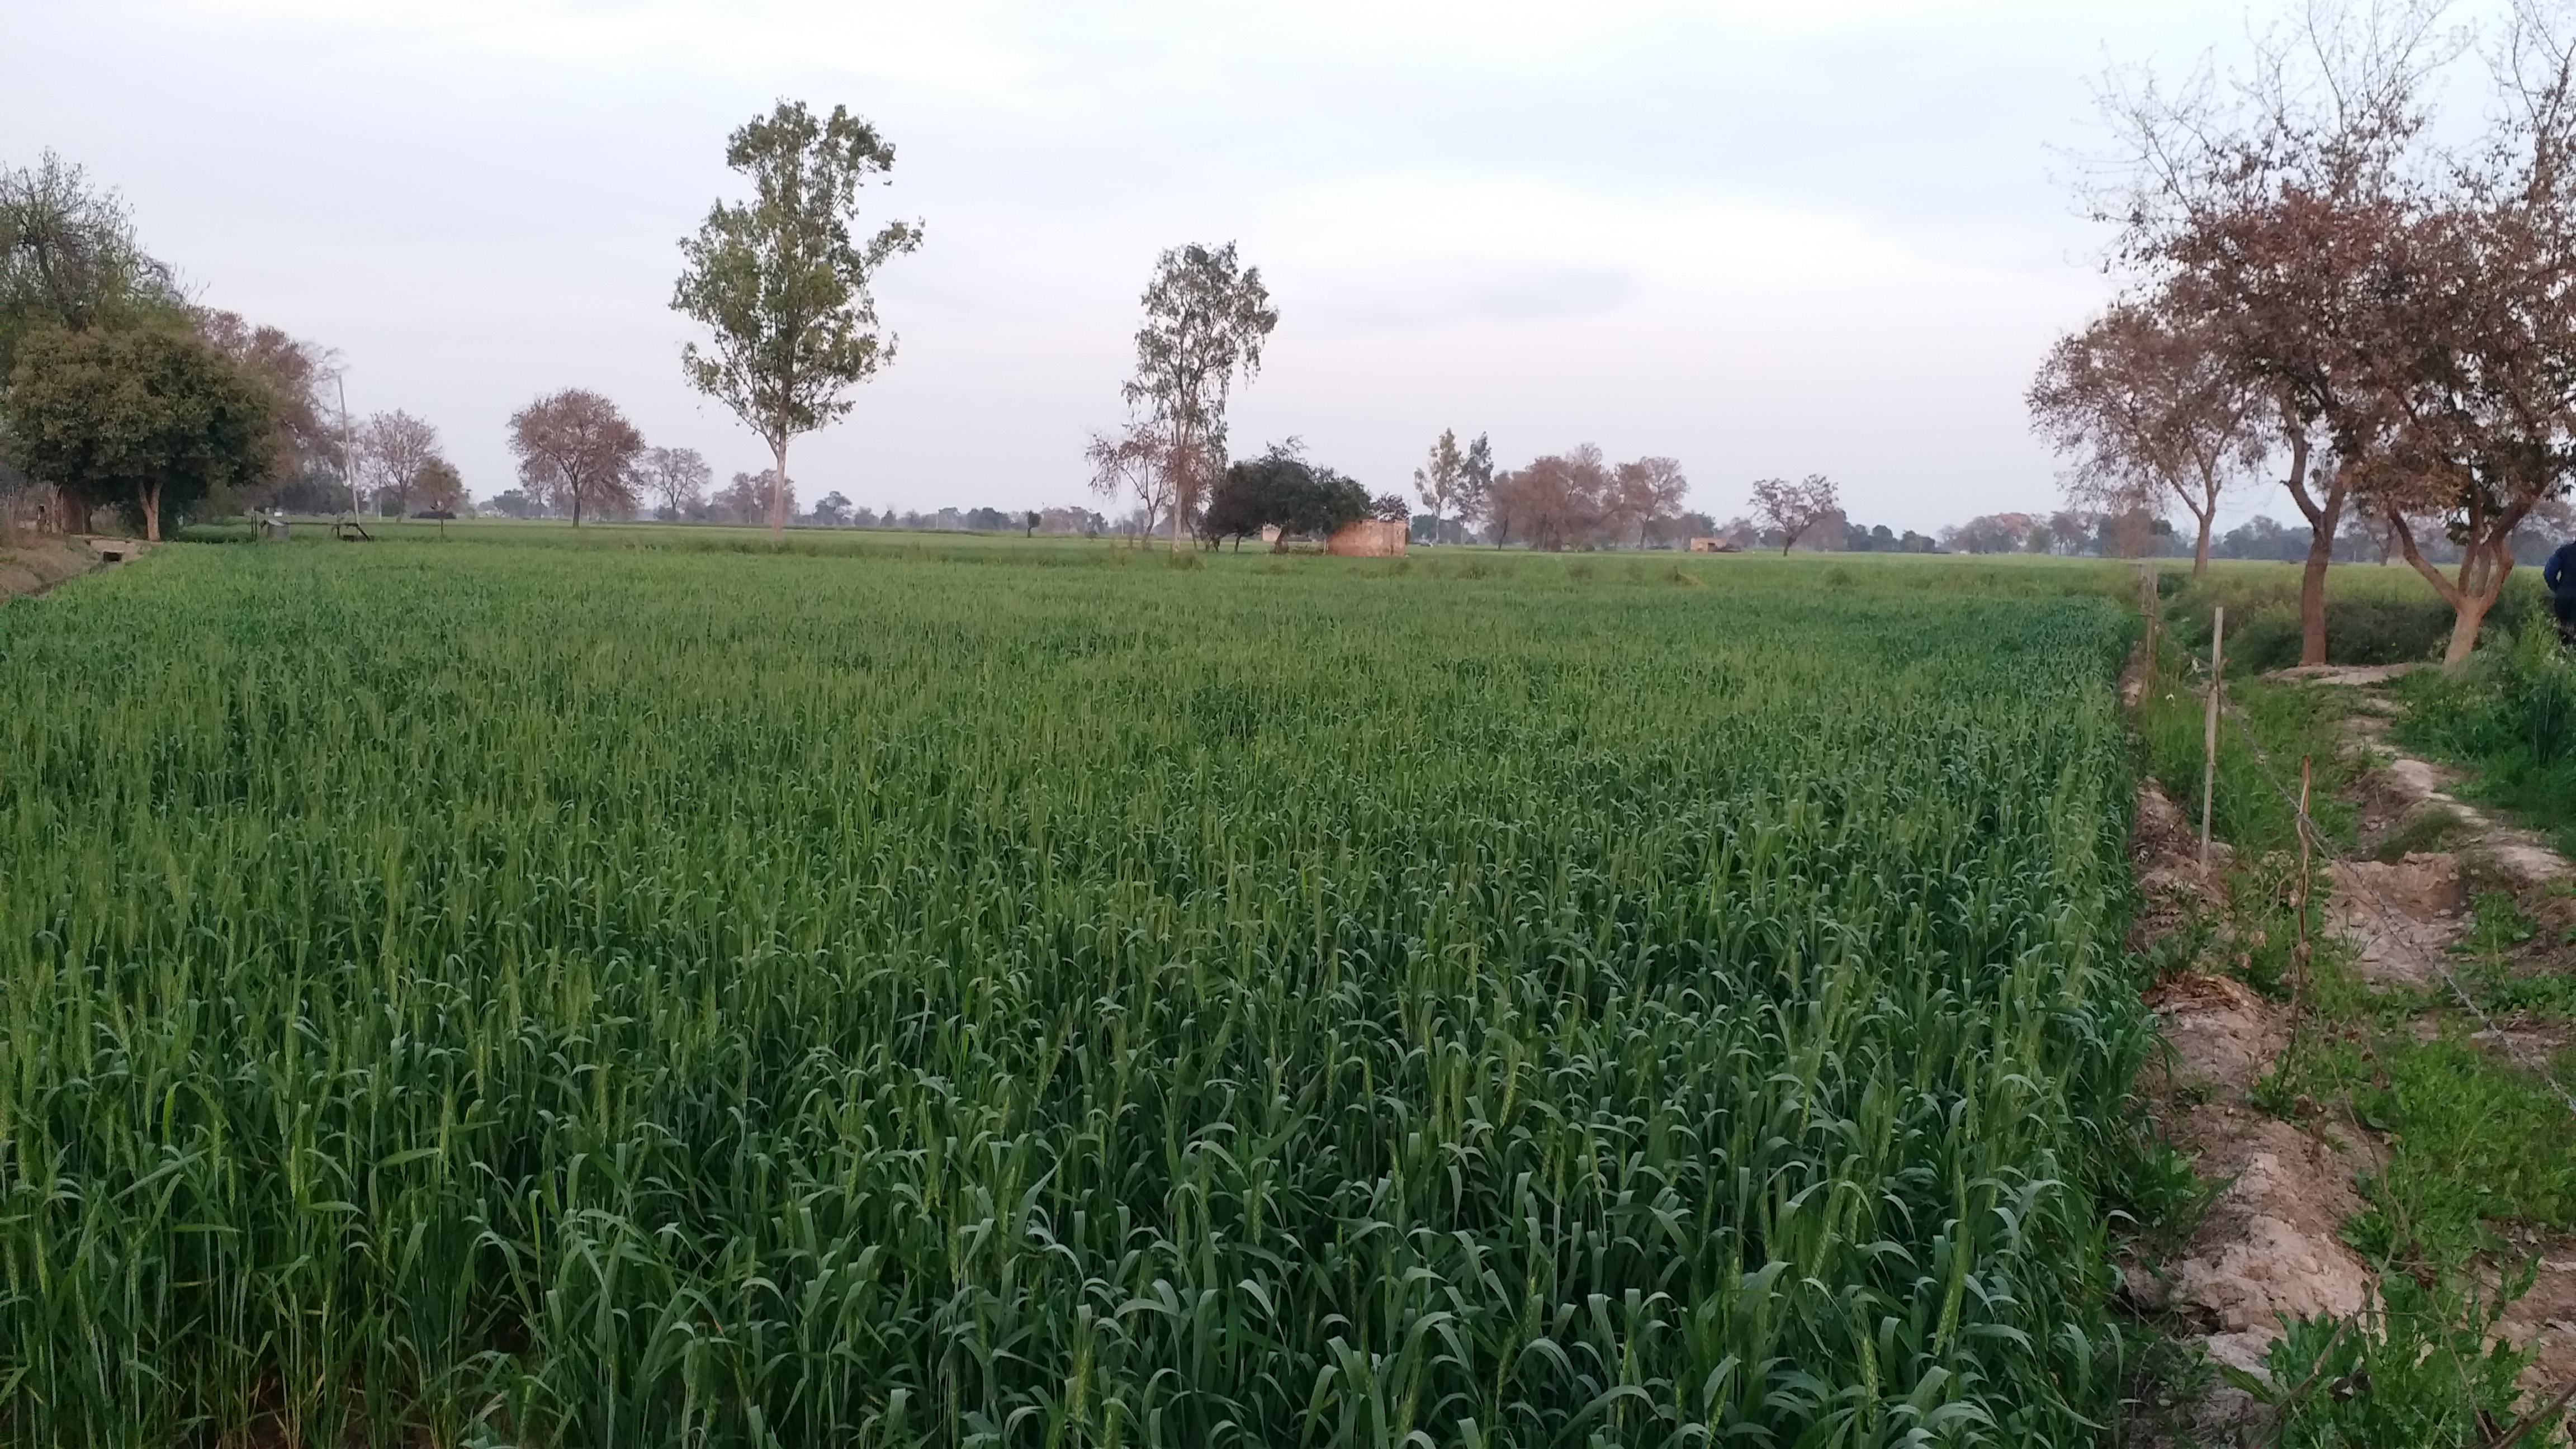 Wheat Cultivation in Haryana